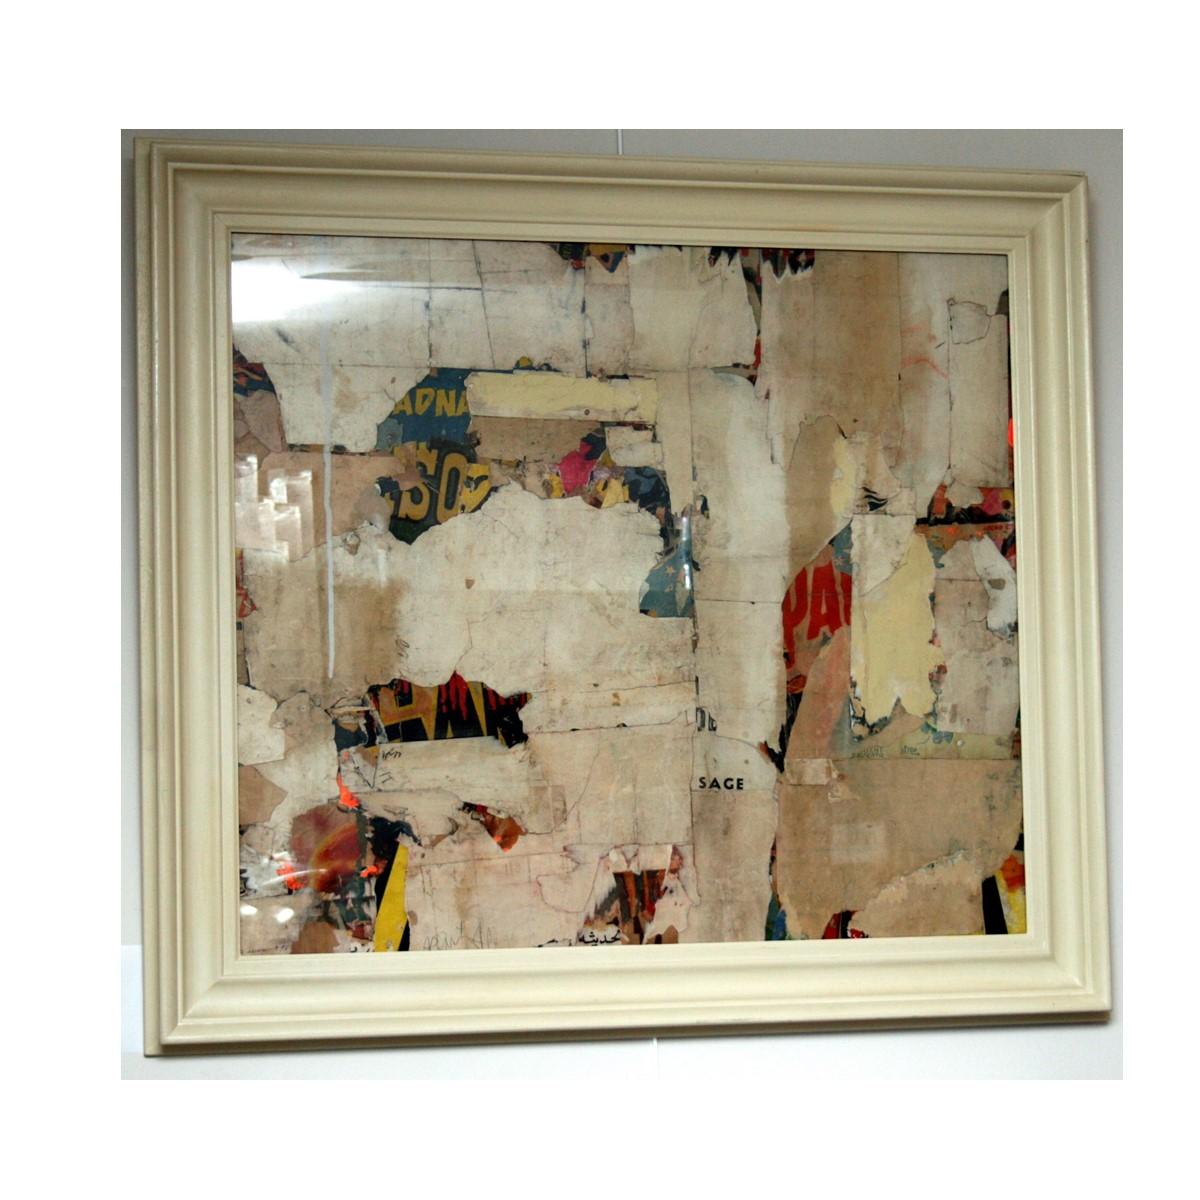 Medium Abstract Collage from The Remnants Series by Artist Huw Griffith
Griffith depicts the passage of time by layering his materials – fragile ephemera marked by age.
Part of a series of work exploring decomposition, the passing of time –